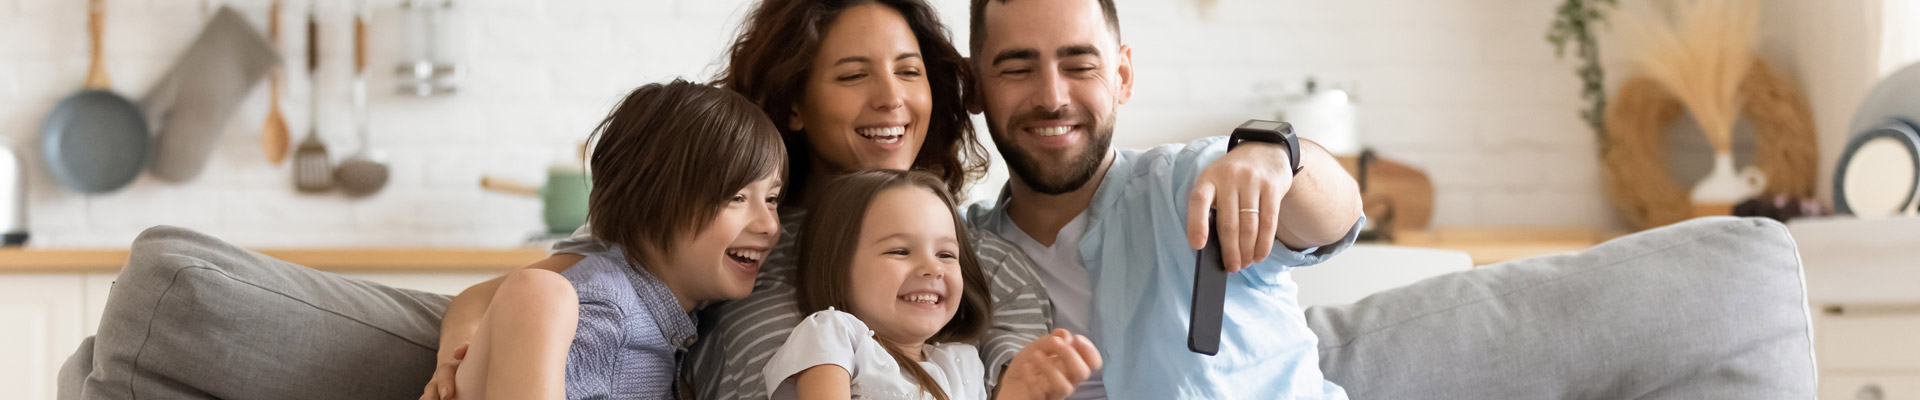 Family smiling with cell phone